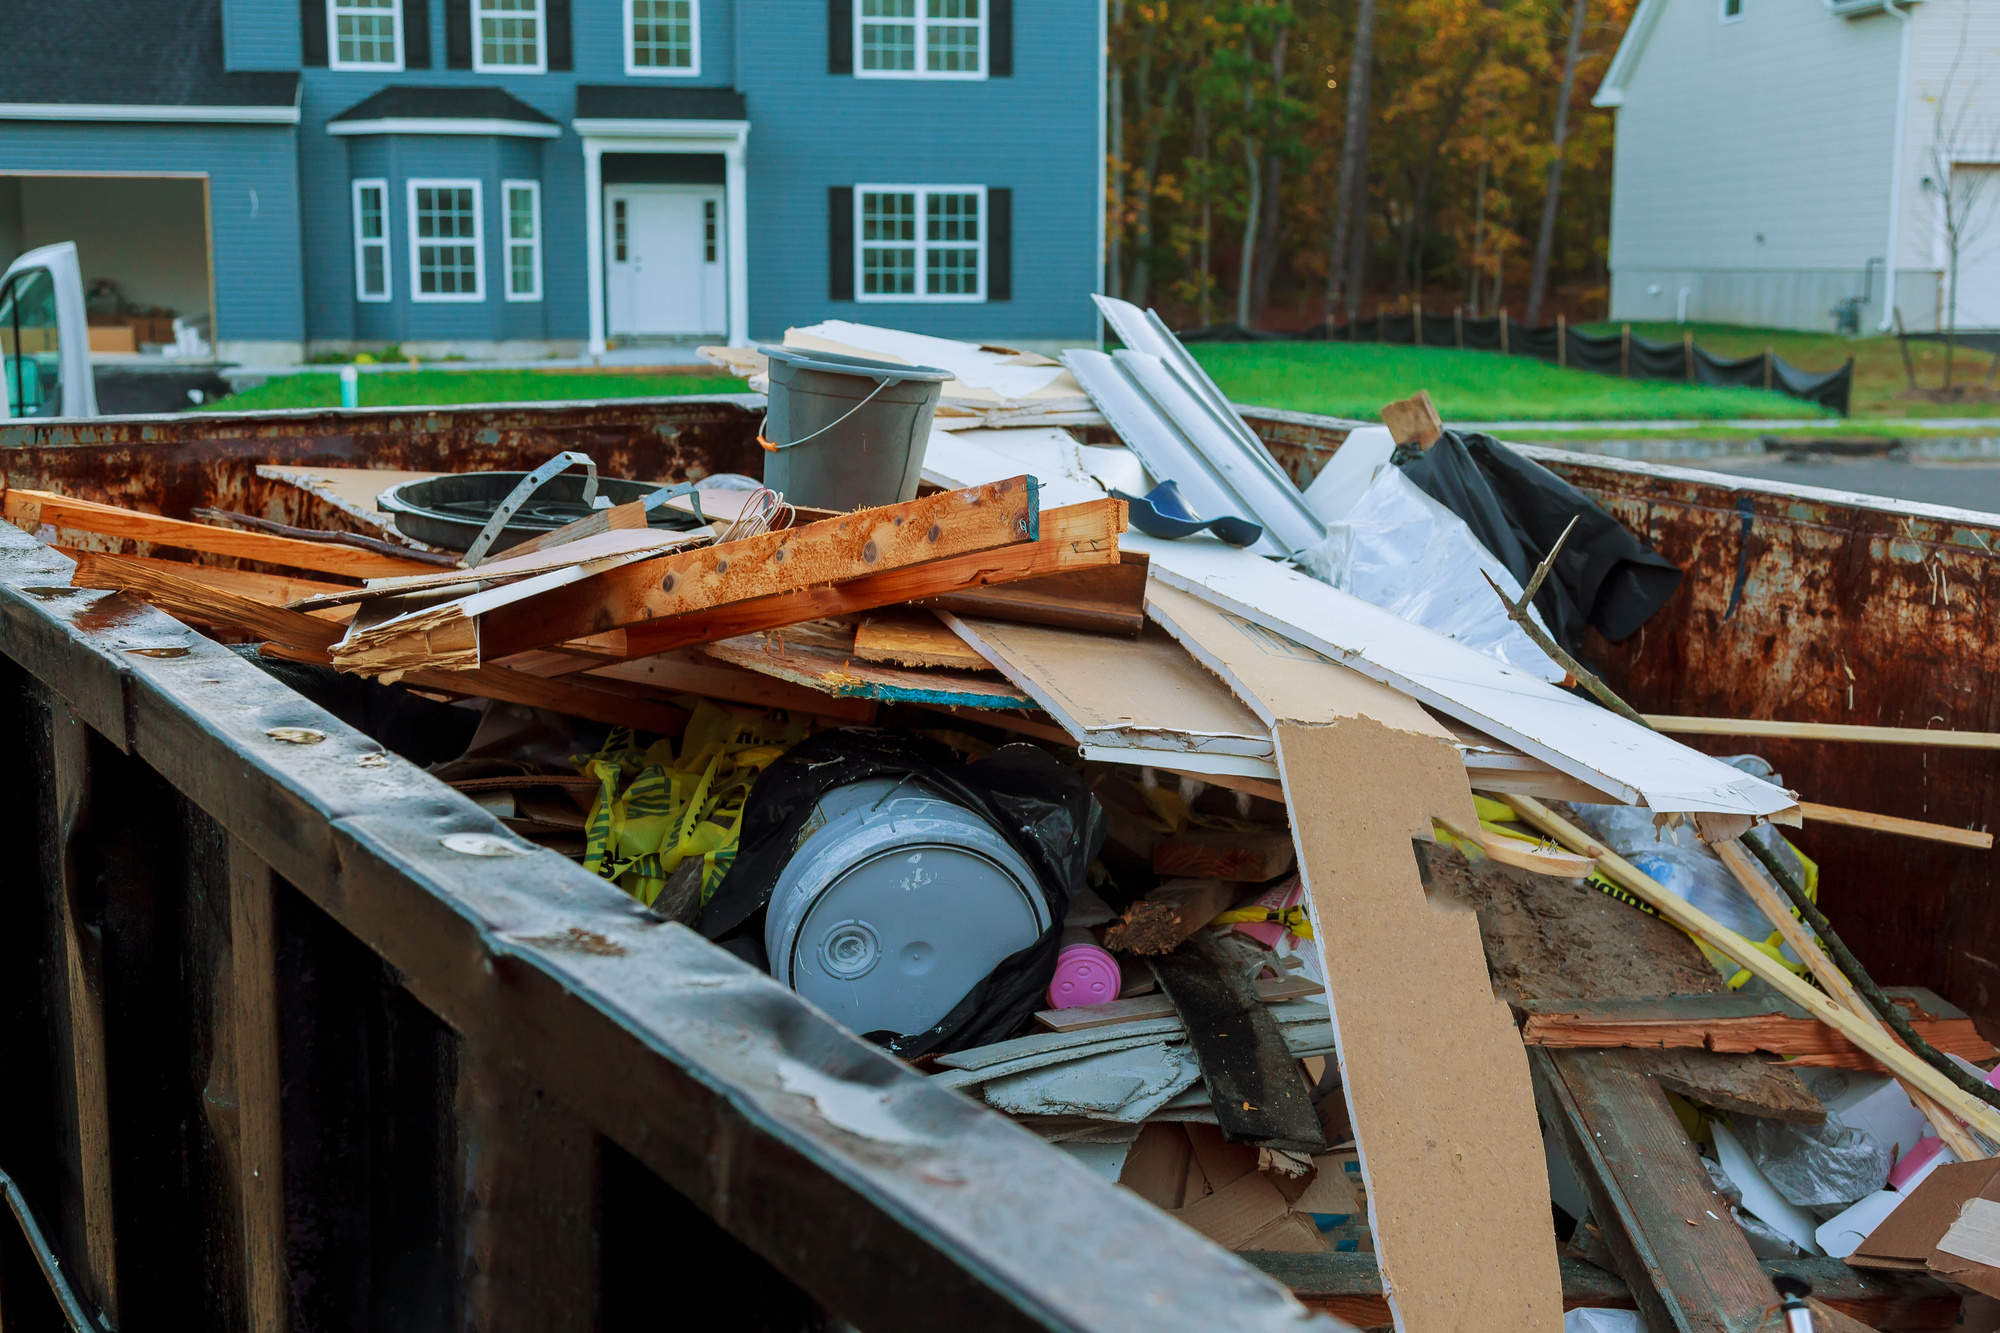 Dumpster Rental and Services in Ardencroft, DE